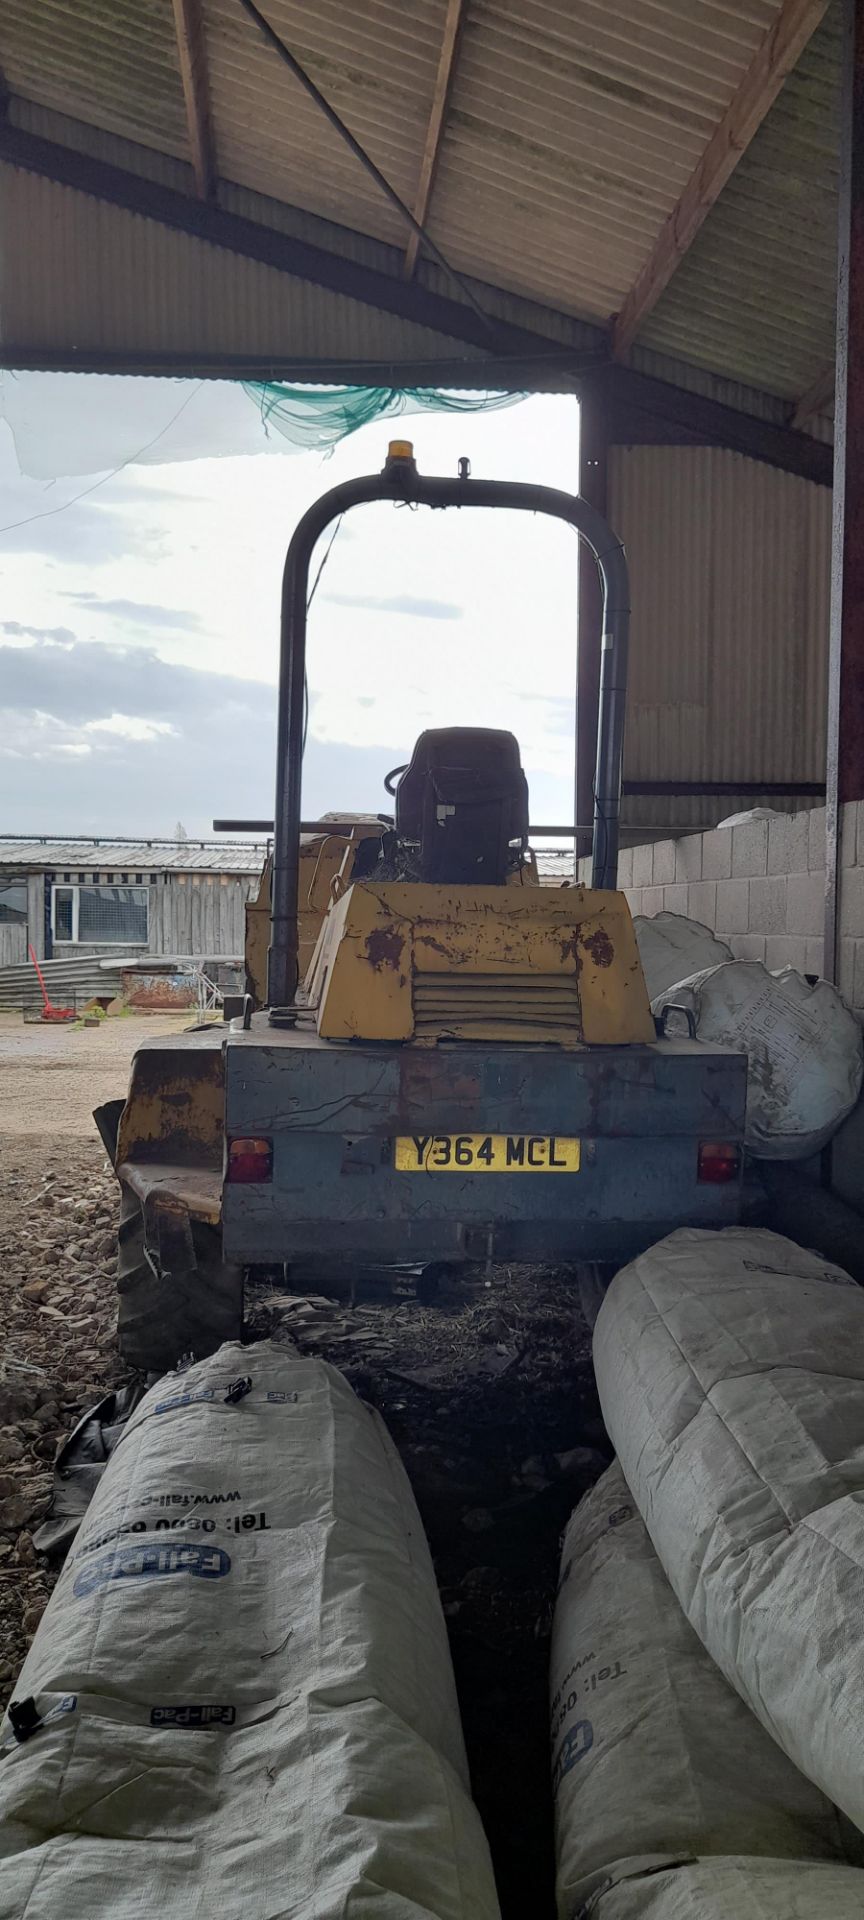 Newson 6 Tonne Dumper converted to mobile fuel dowser – Spares or Repair - Image 4 of 7